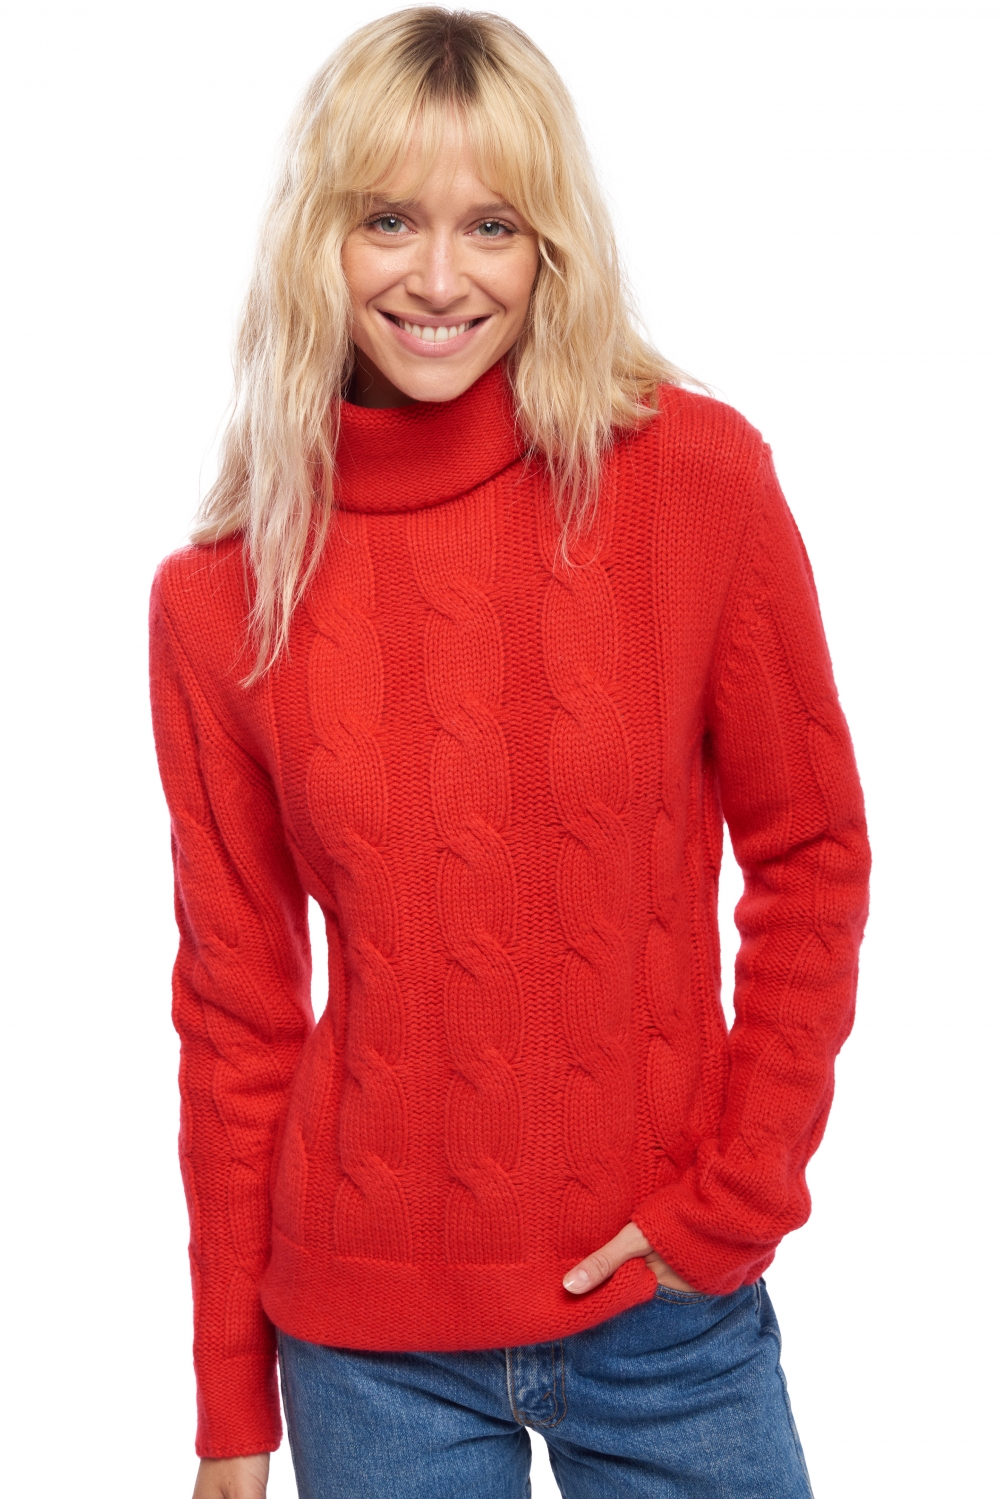 Cashmere ladies timeless classics blanche rouge 3xl